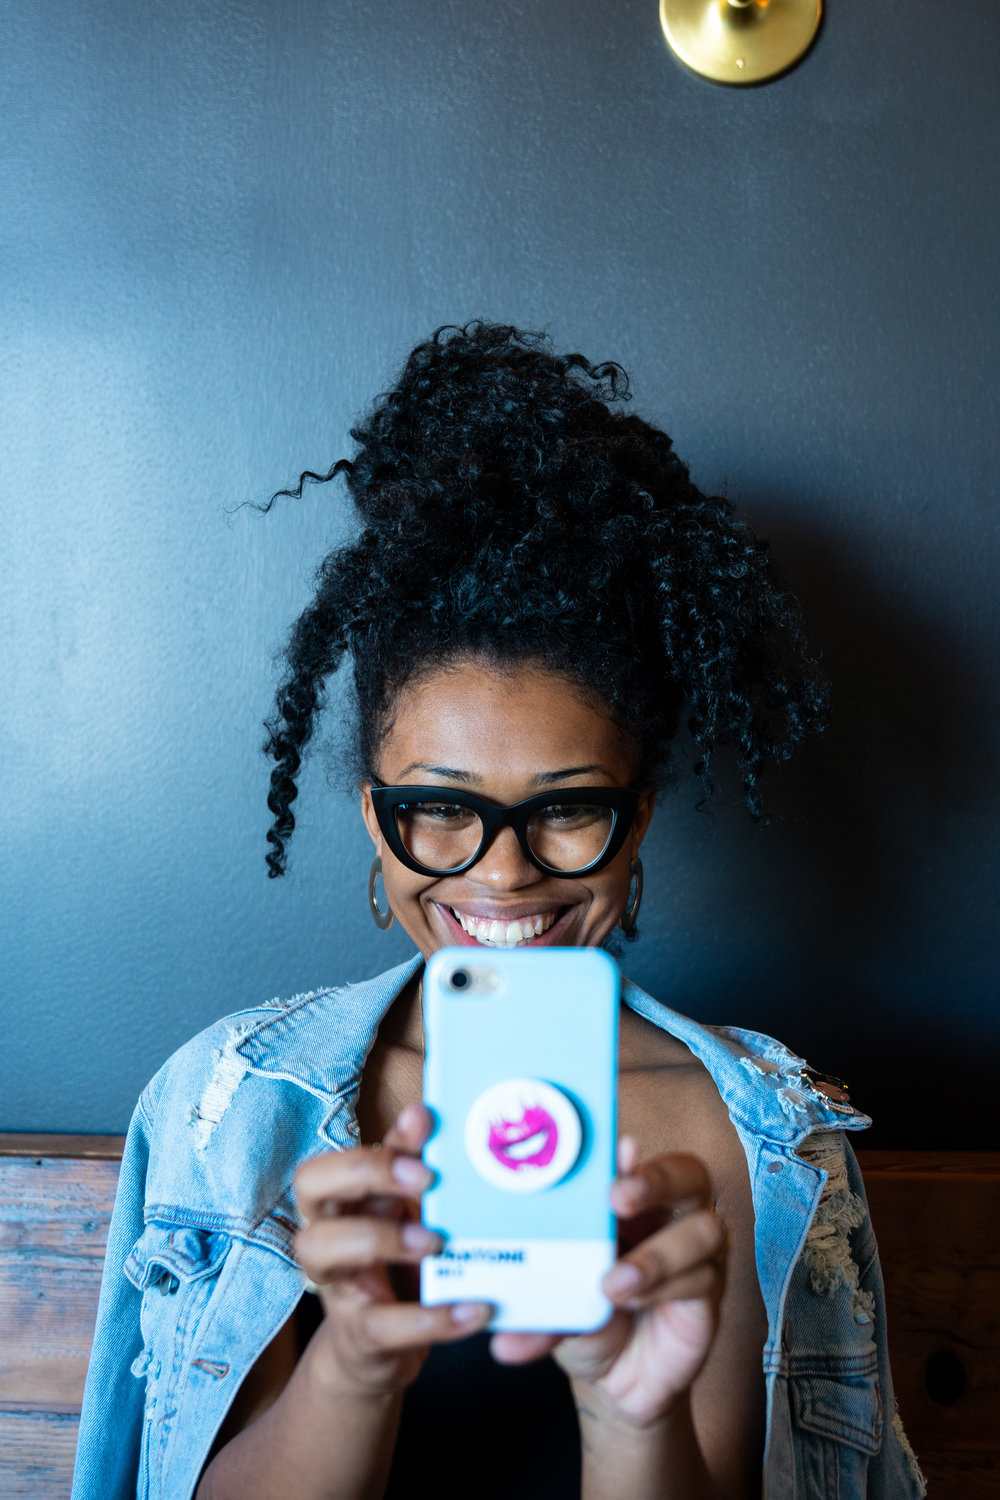 The Short Guide To Dating Apps Blk Girl Culture